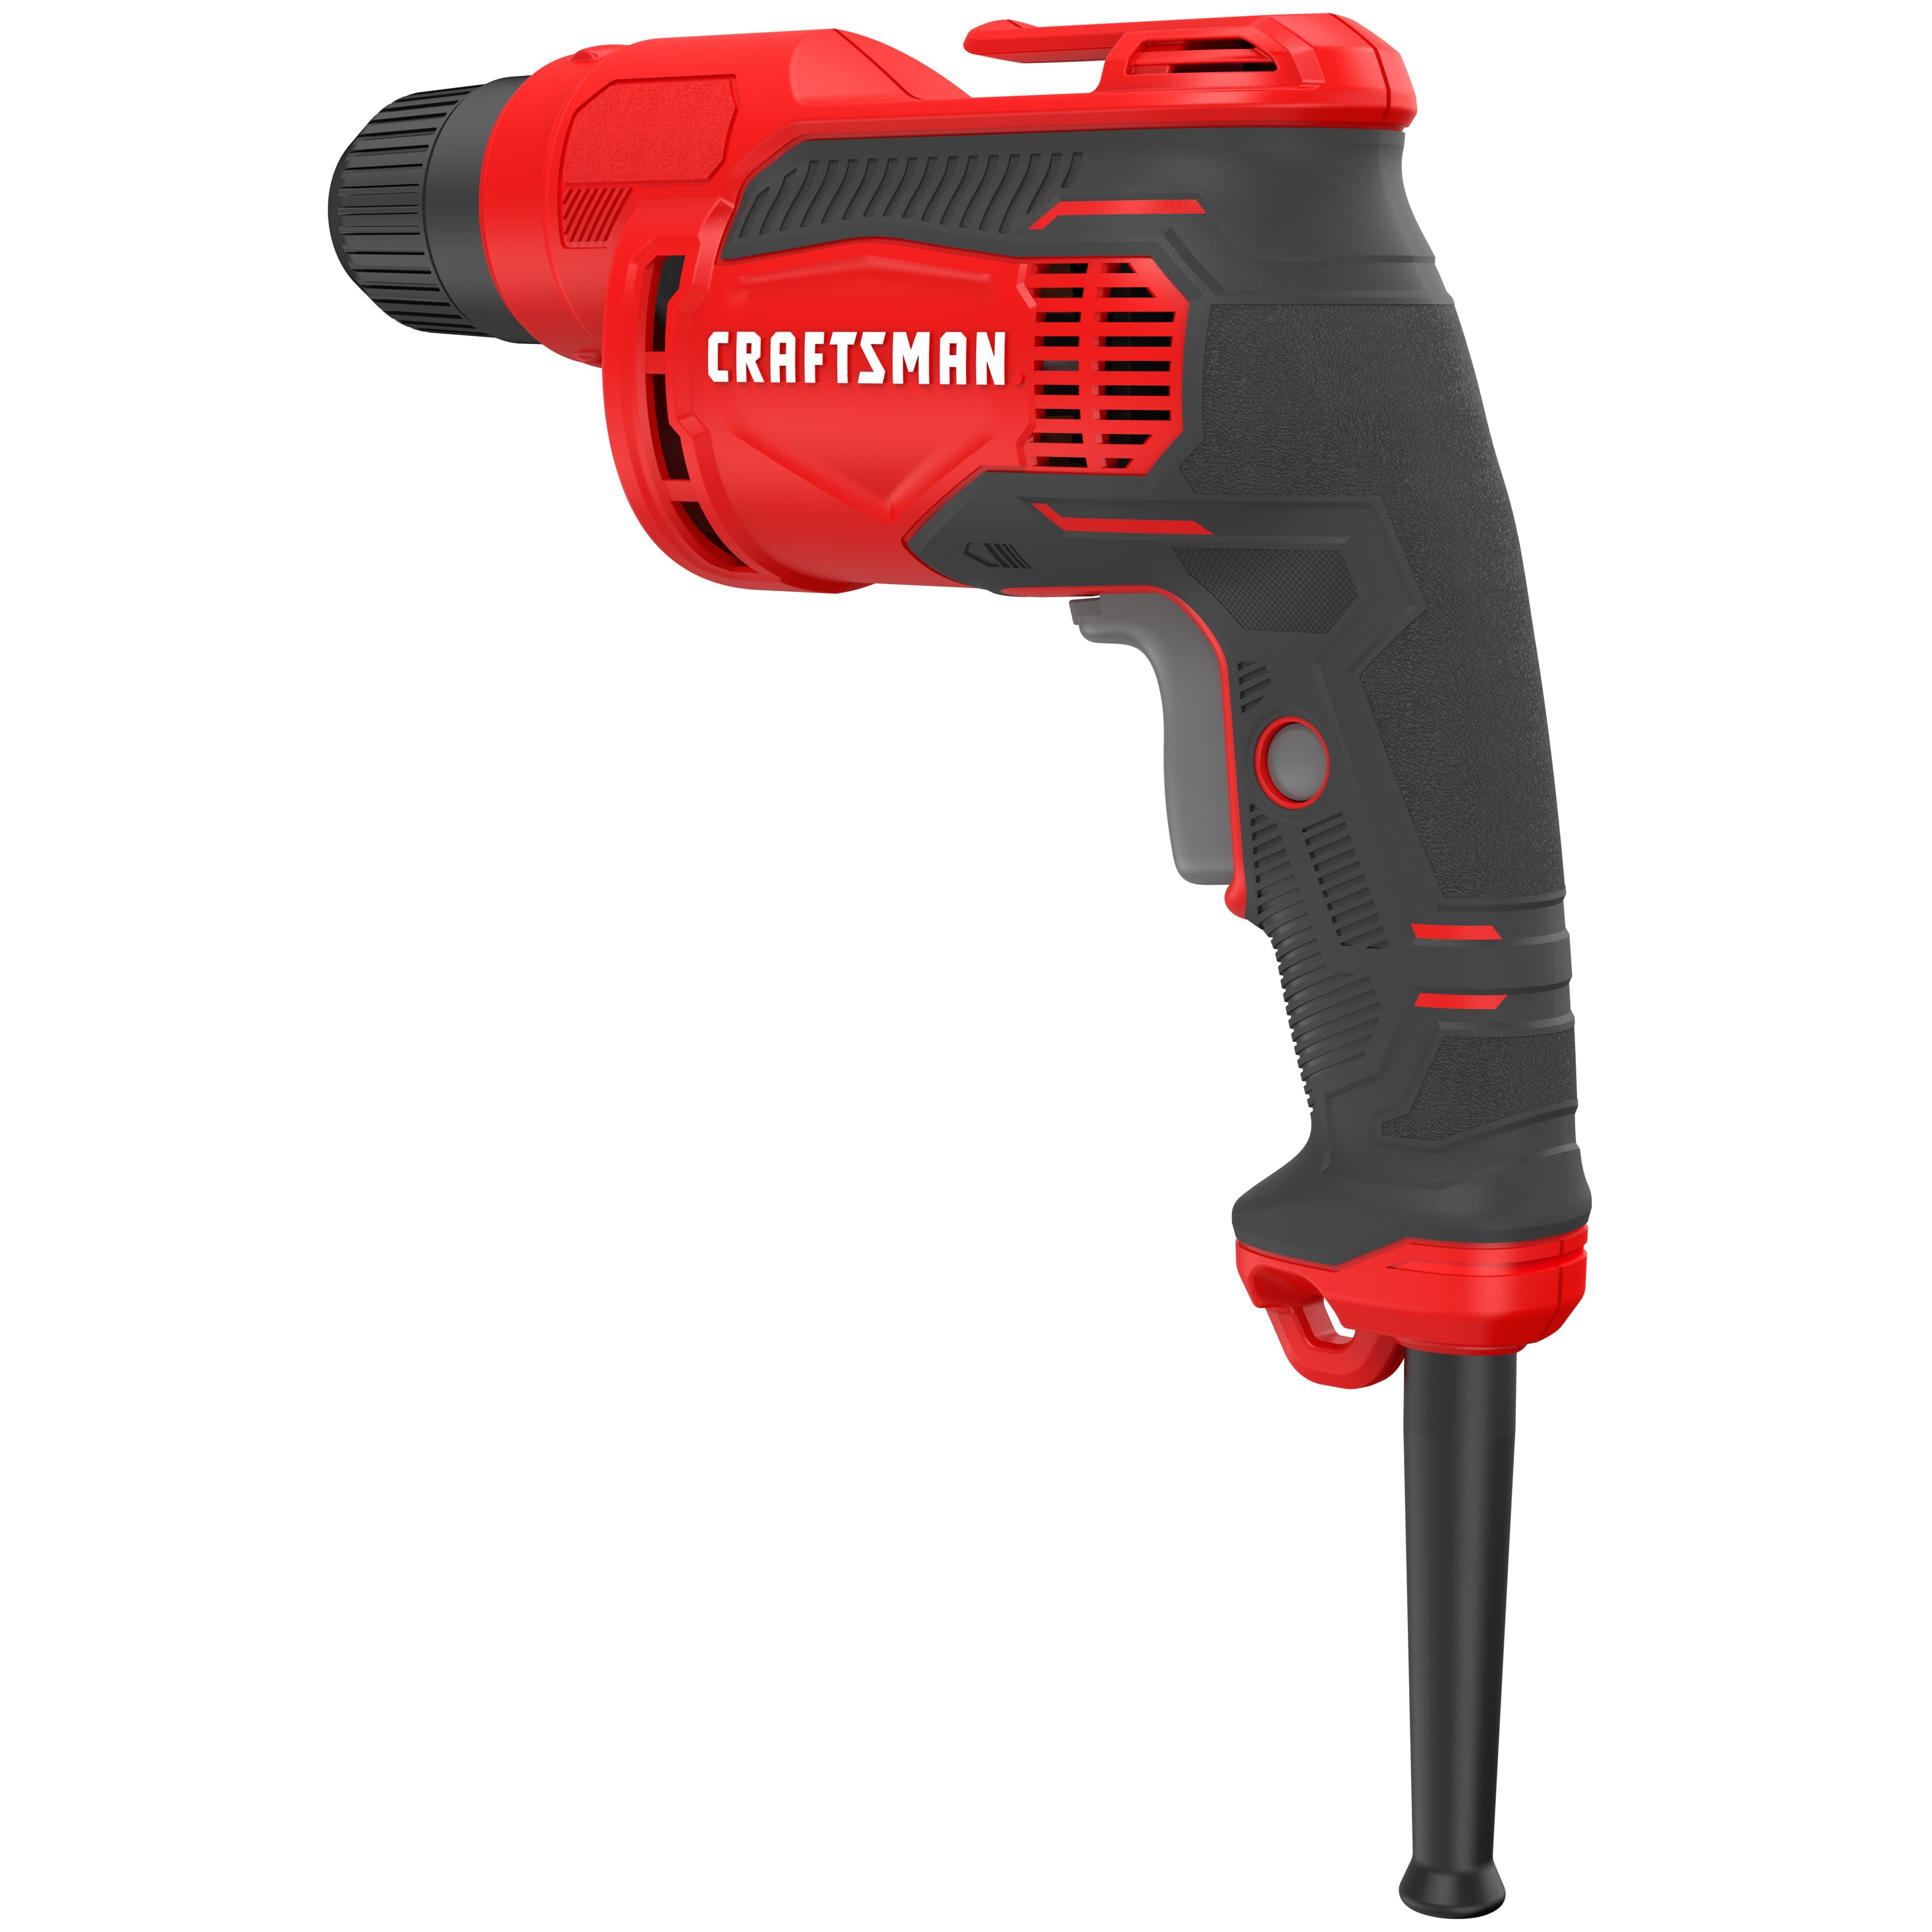 Wild Edge Corded Drill, Keyed Chuck 3/8-Inch, 3.0-Amp Portable Hand Drill  (SCD3A)